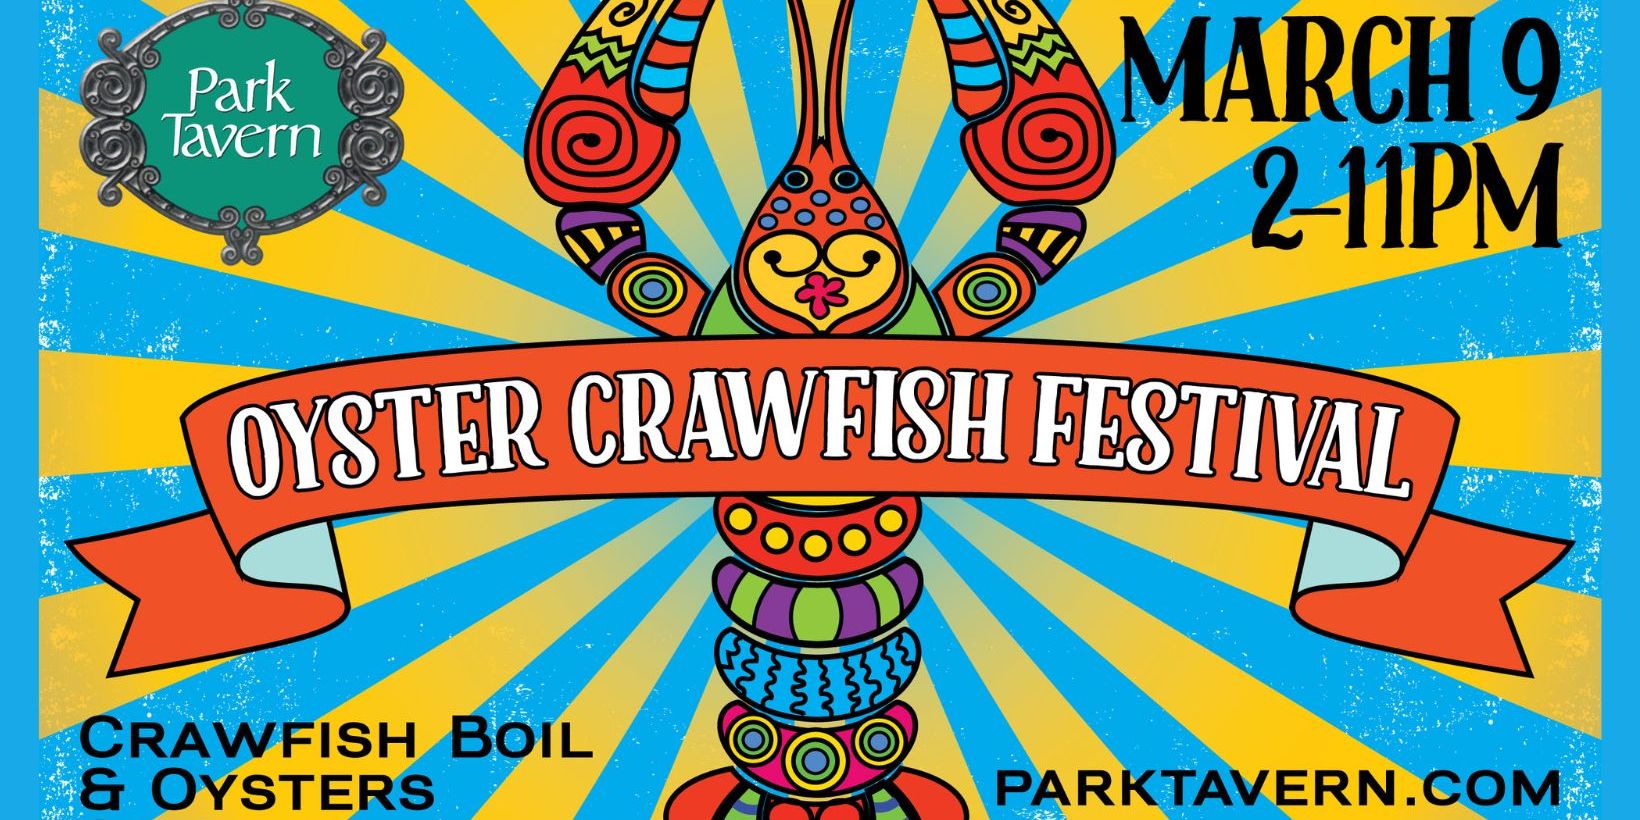 Oyster Crawfish Festival at Park Tavern With The Band Hotel Fiction promotional image